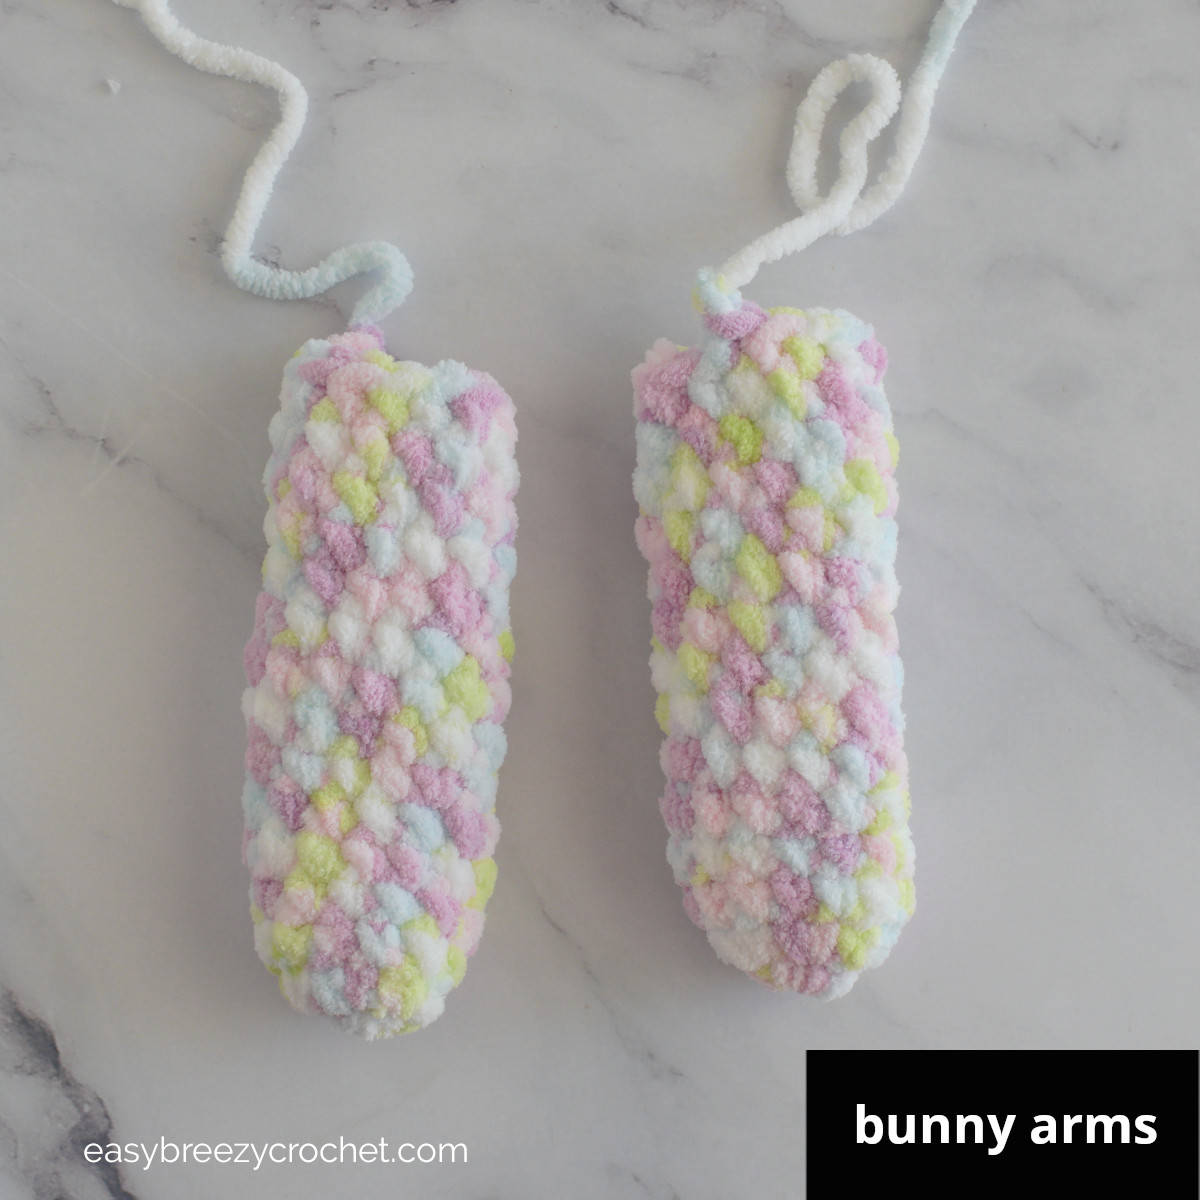 Two crochet pieces for bunny arms.